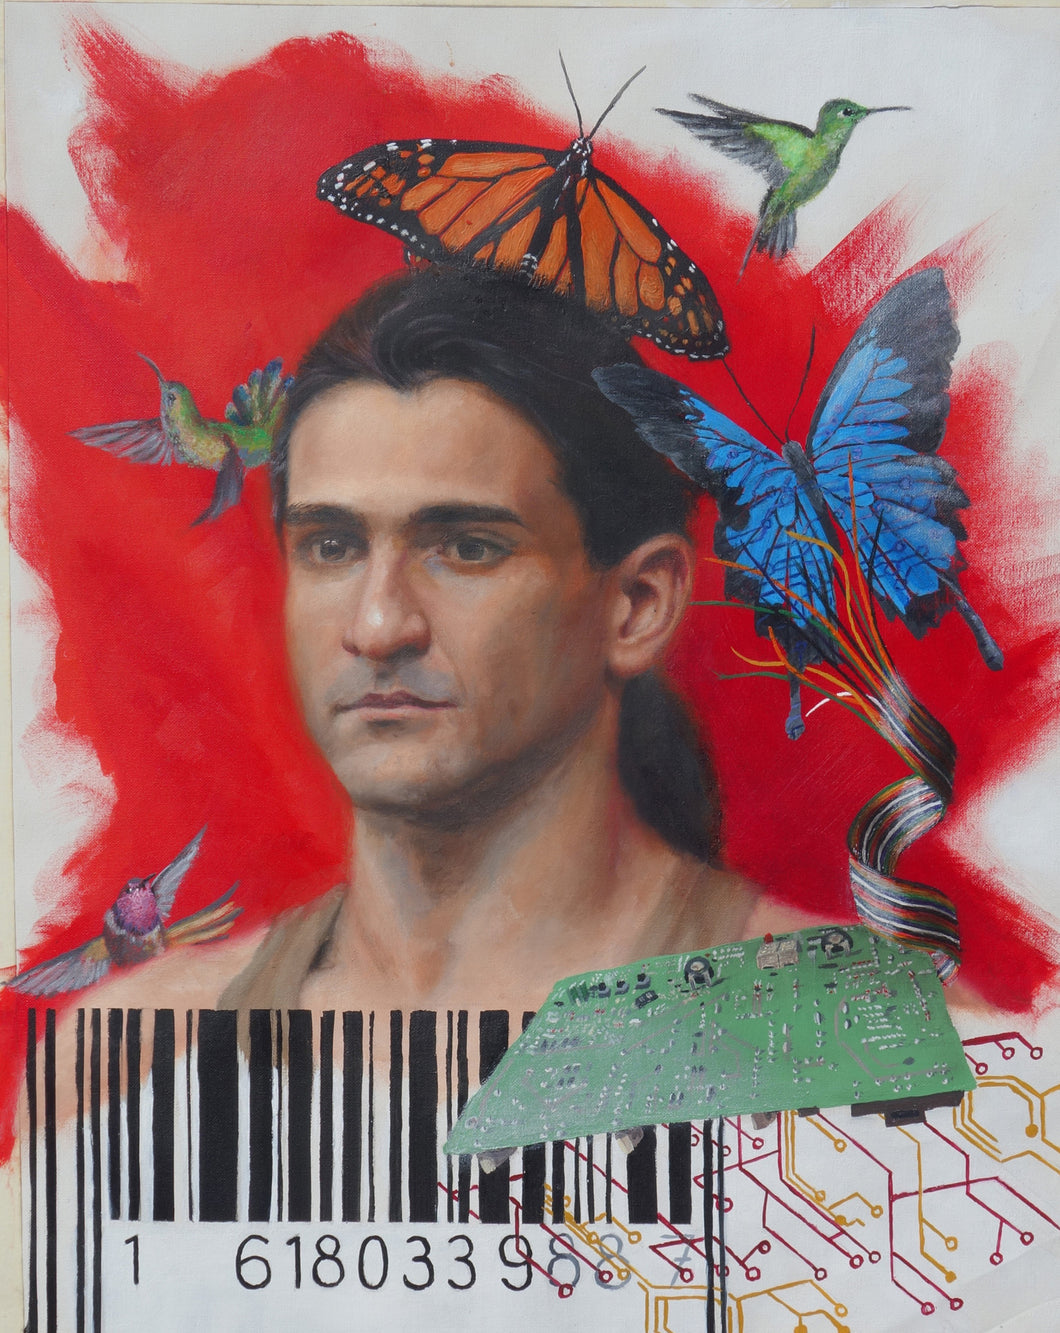 Back to Nature (Must Get) Dazed Man Dreams of Escaping Technology to Fly with Hummingbirds and Butterflies Mixed Media Painting Collaboration 2 Artists